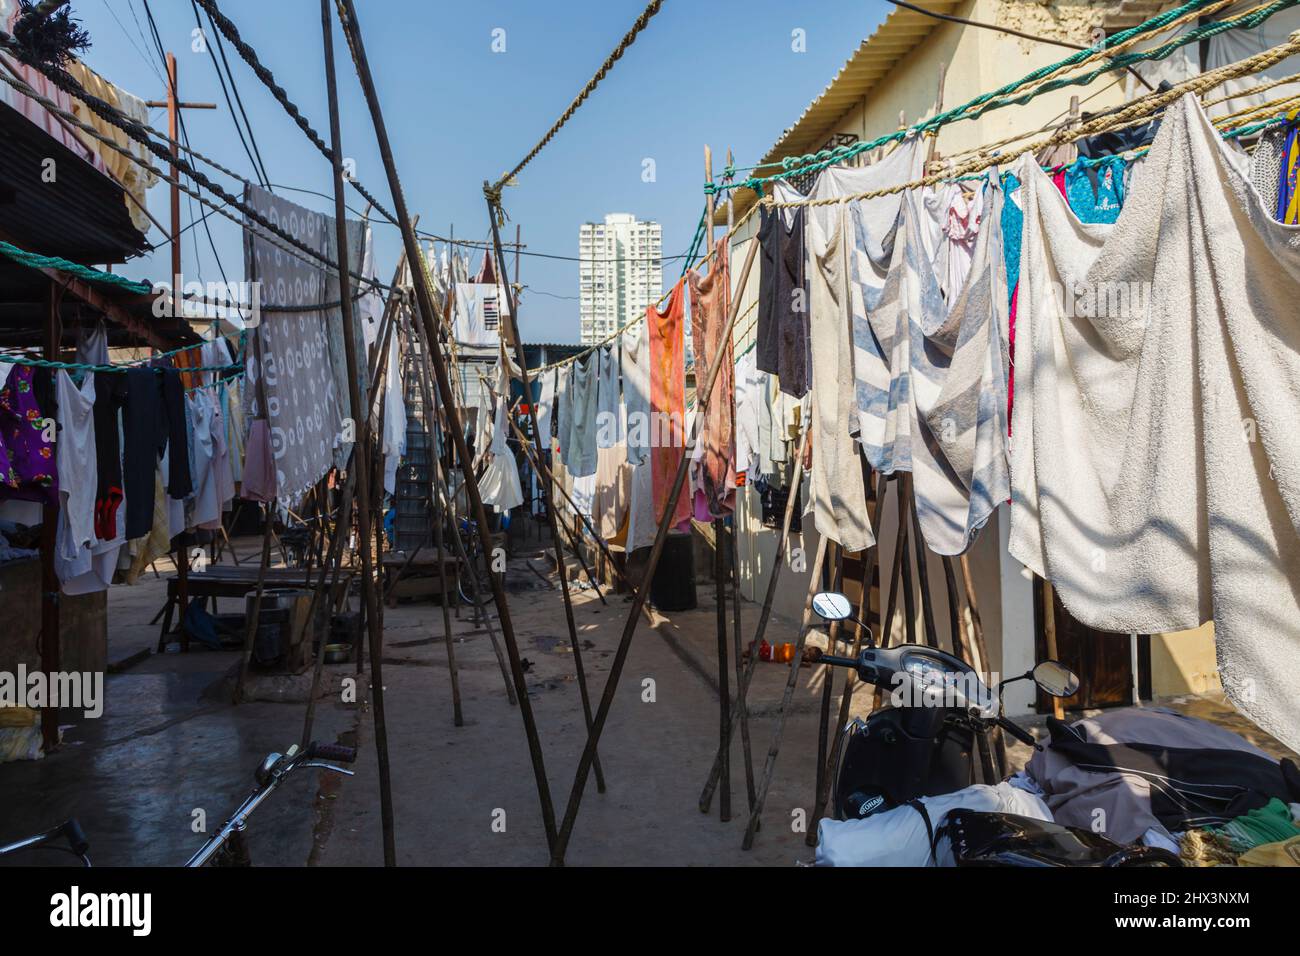 Fresh clean clothes and towels hanging out to dry, drying in the open air in Mahalaxmi Dhobi Ghat, a large open air laundromat in Mumbai, India Stock Photo